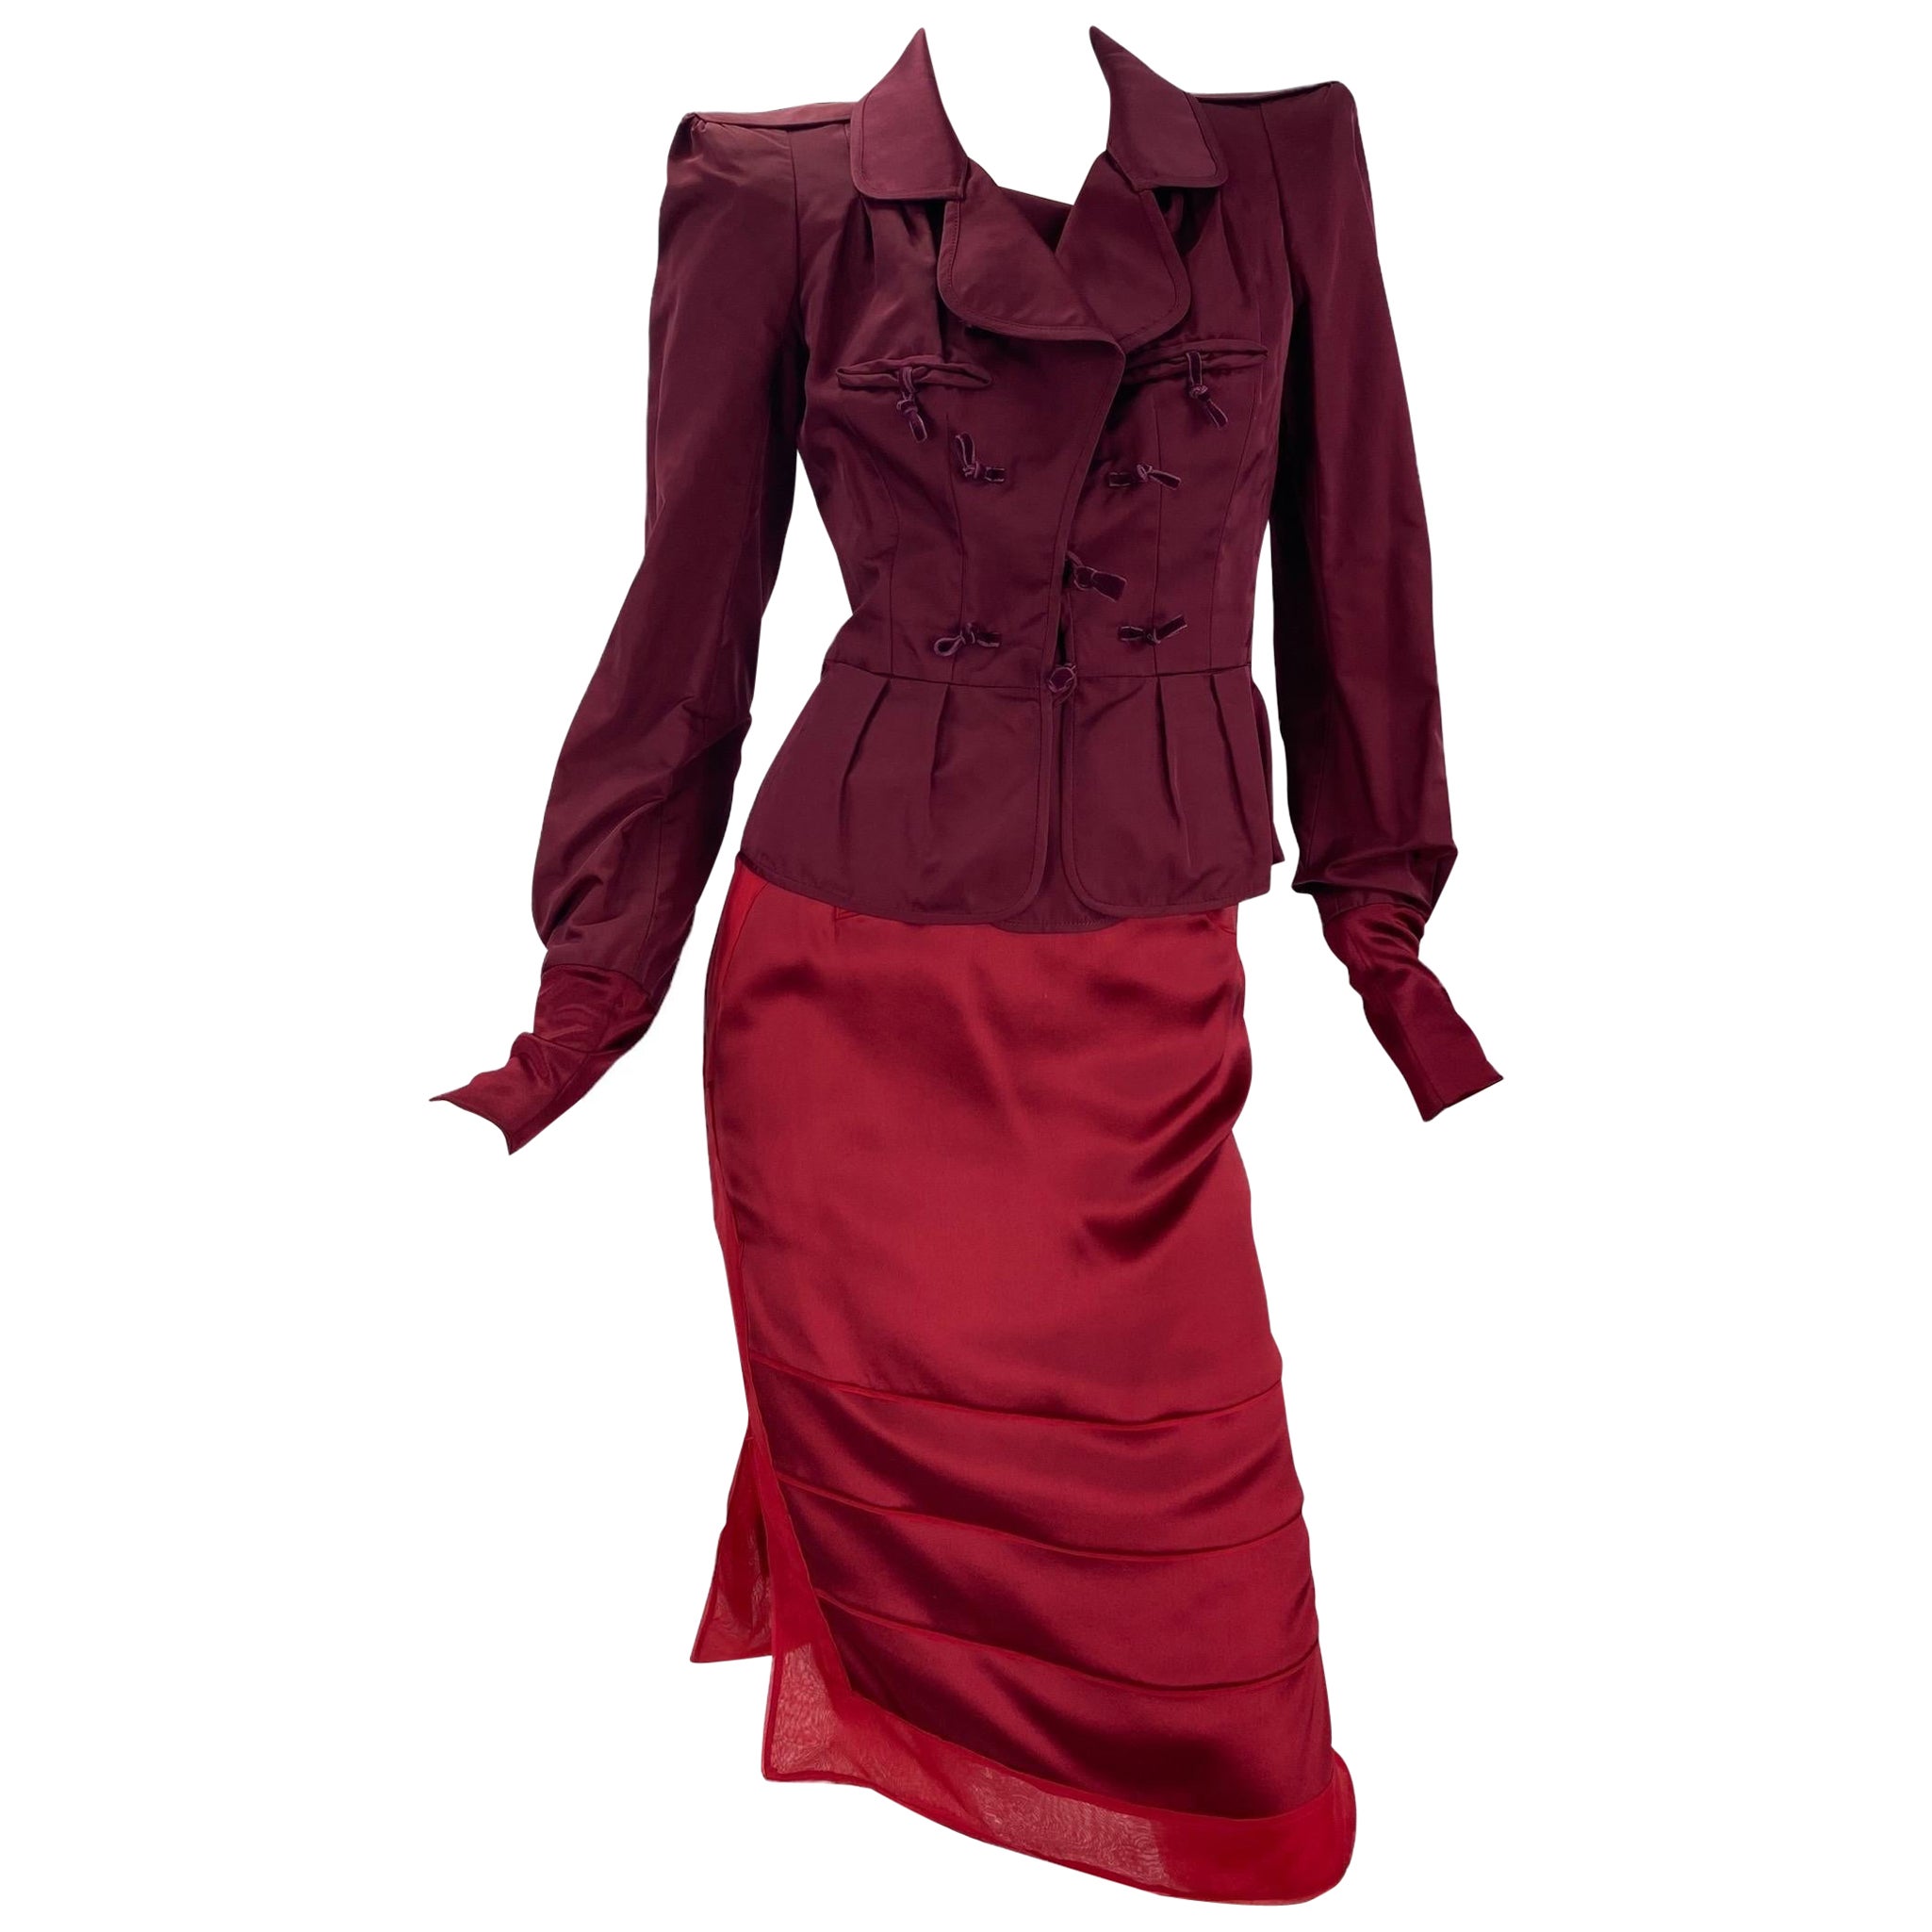  Tom Ford for Yves Saint Laurent F/W 2004 Collection Skirt Suit Size US 4 - 6 For Sale